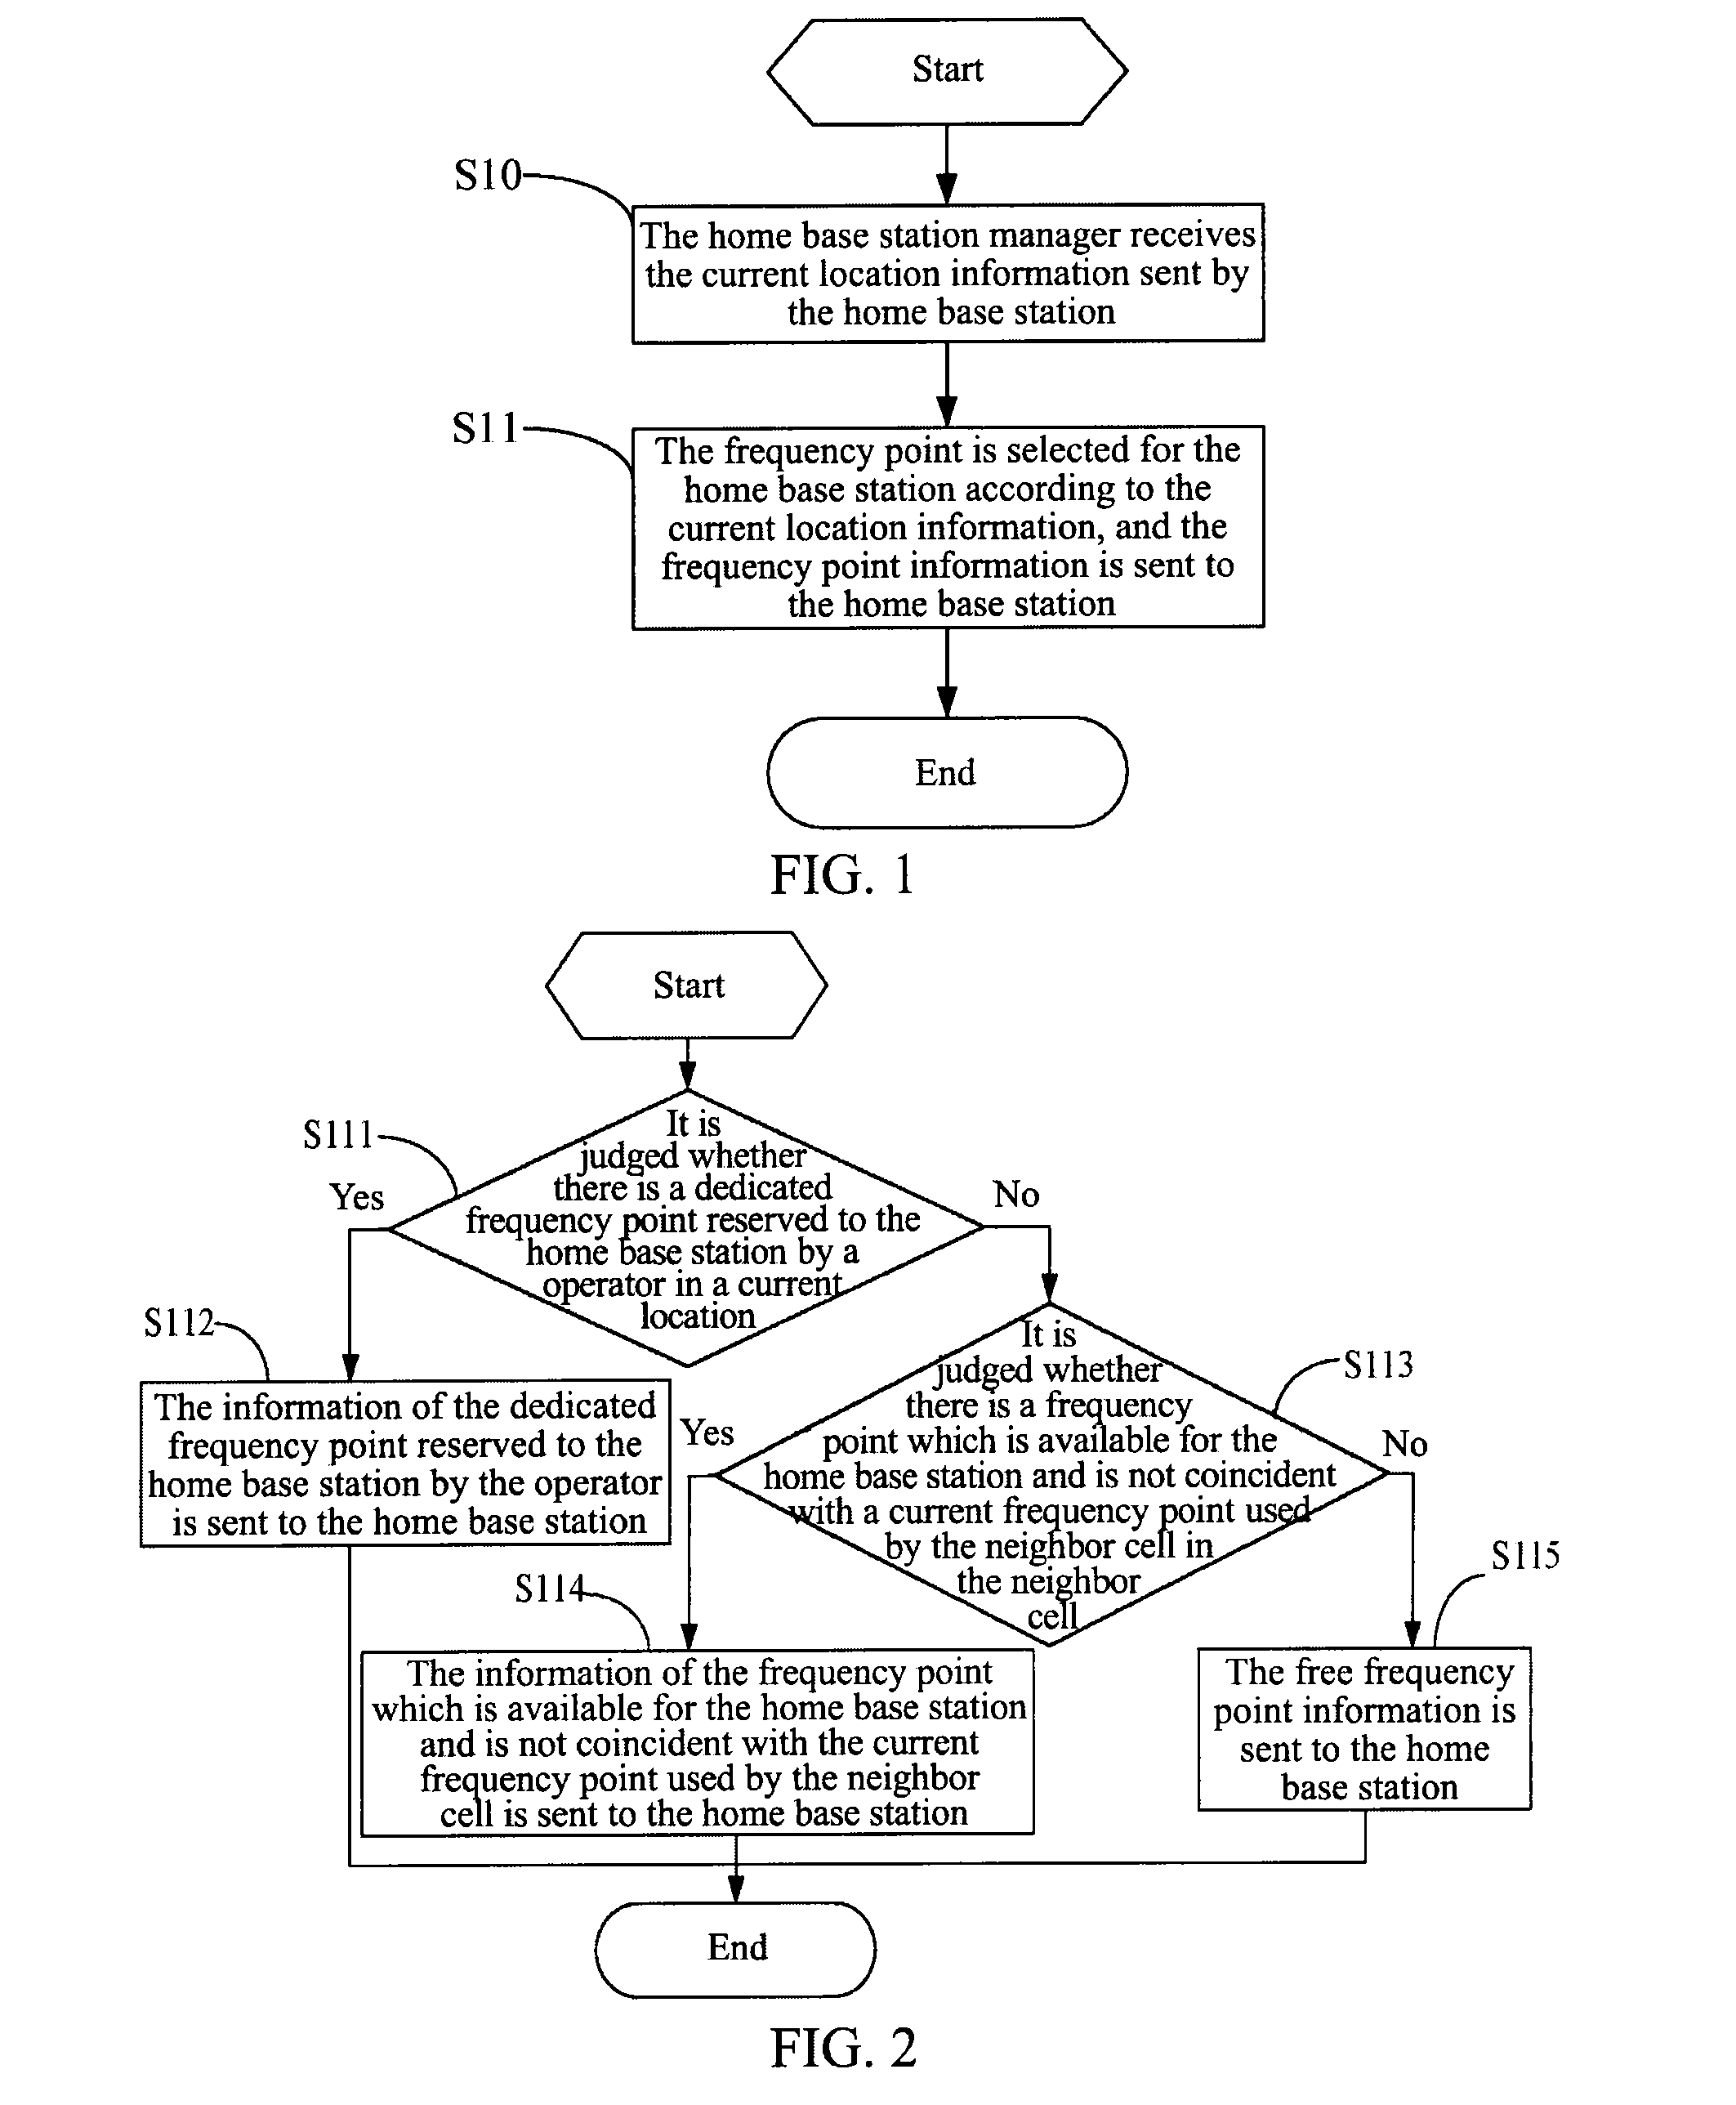 Method and System for Allocating Home Base Station Frequency Point and Home Base Station Manager